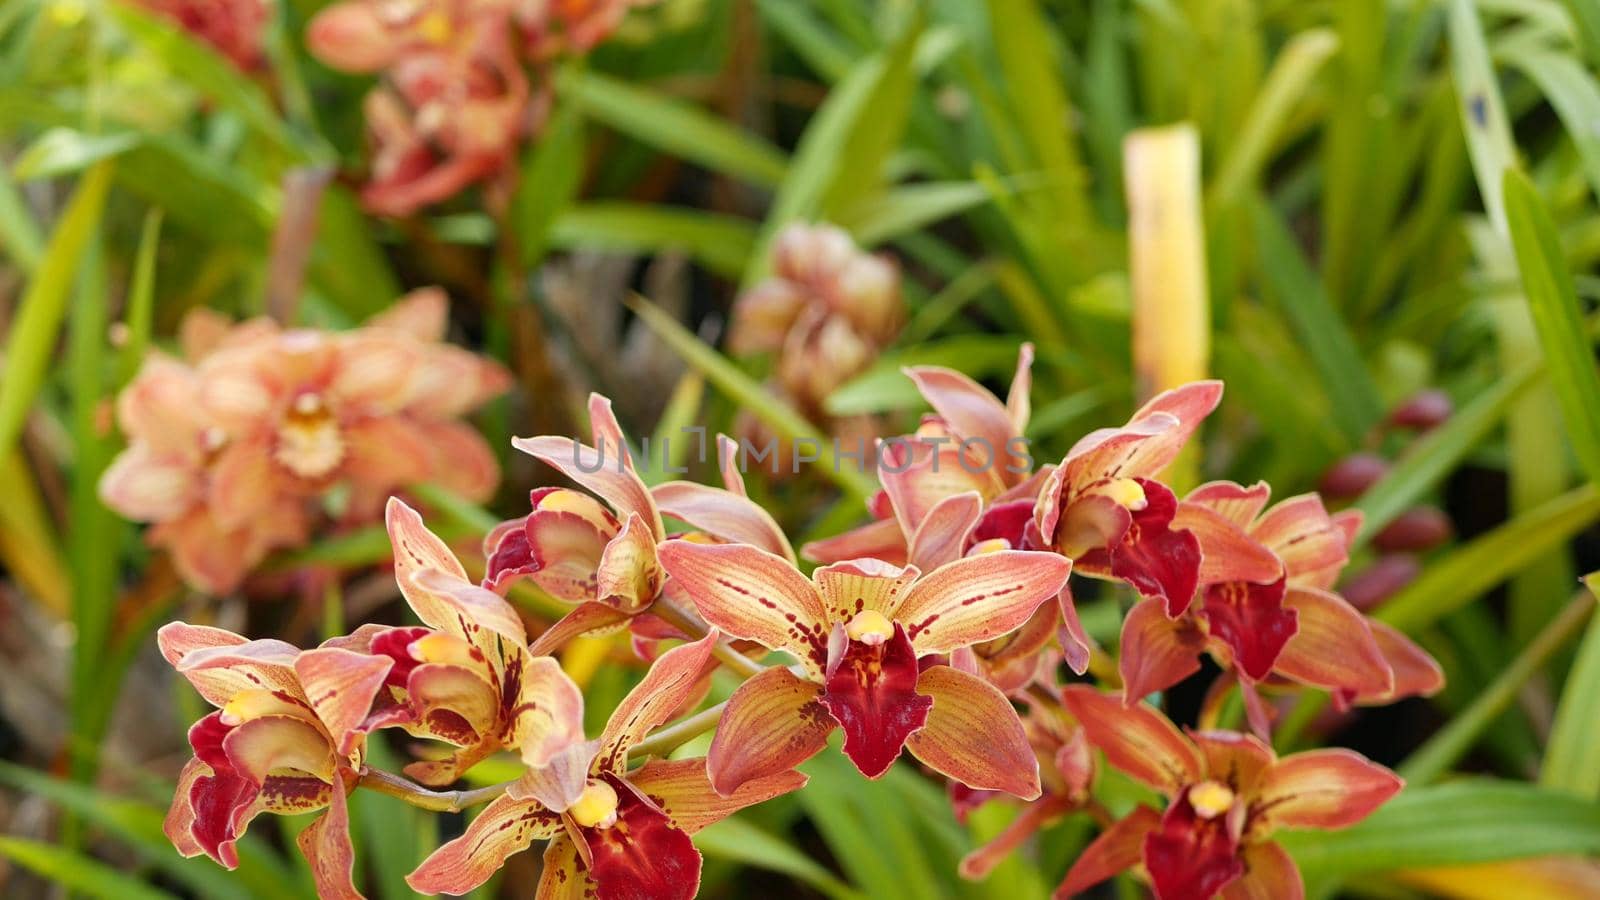 Orchid flower blossom in green leaves. Elegant colorful floral bloom. Exotic tropical jungle rainforest botanical atmosphere. Natural garden vivid greenery paradise aesthetic. Decorative floriculture by DogoraSun